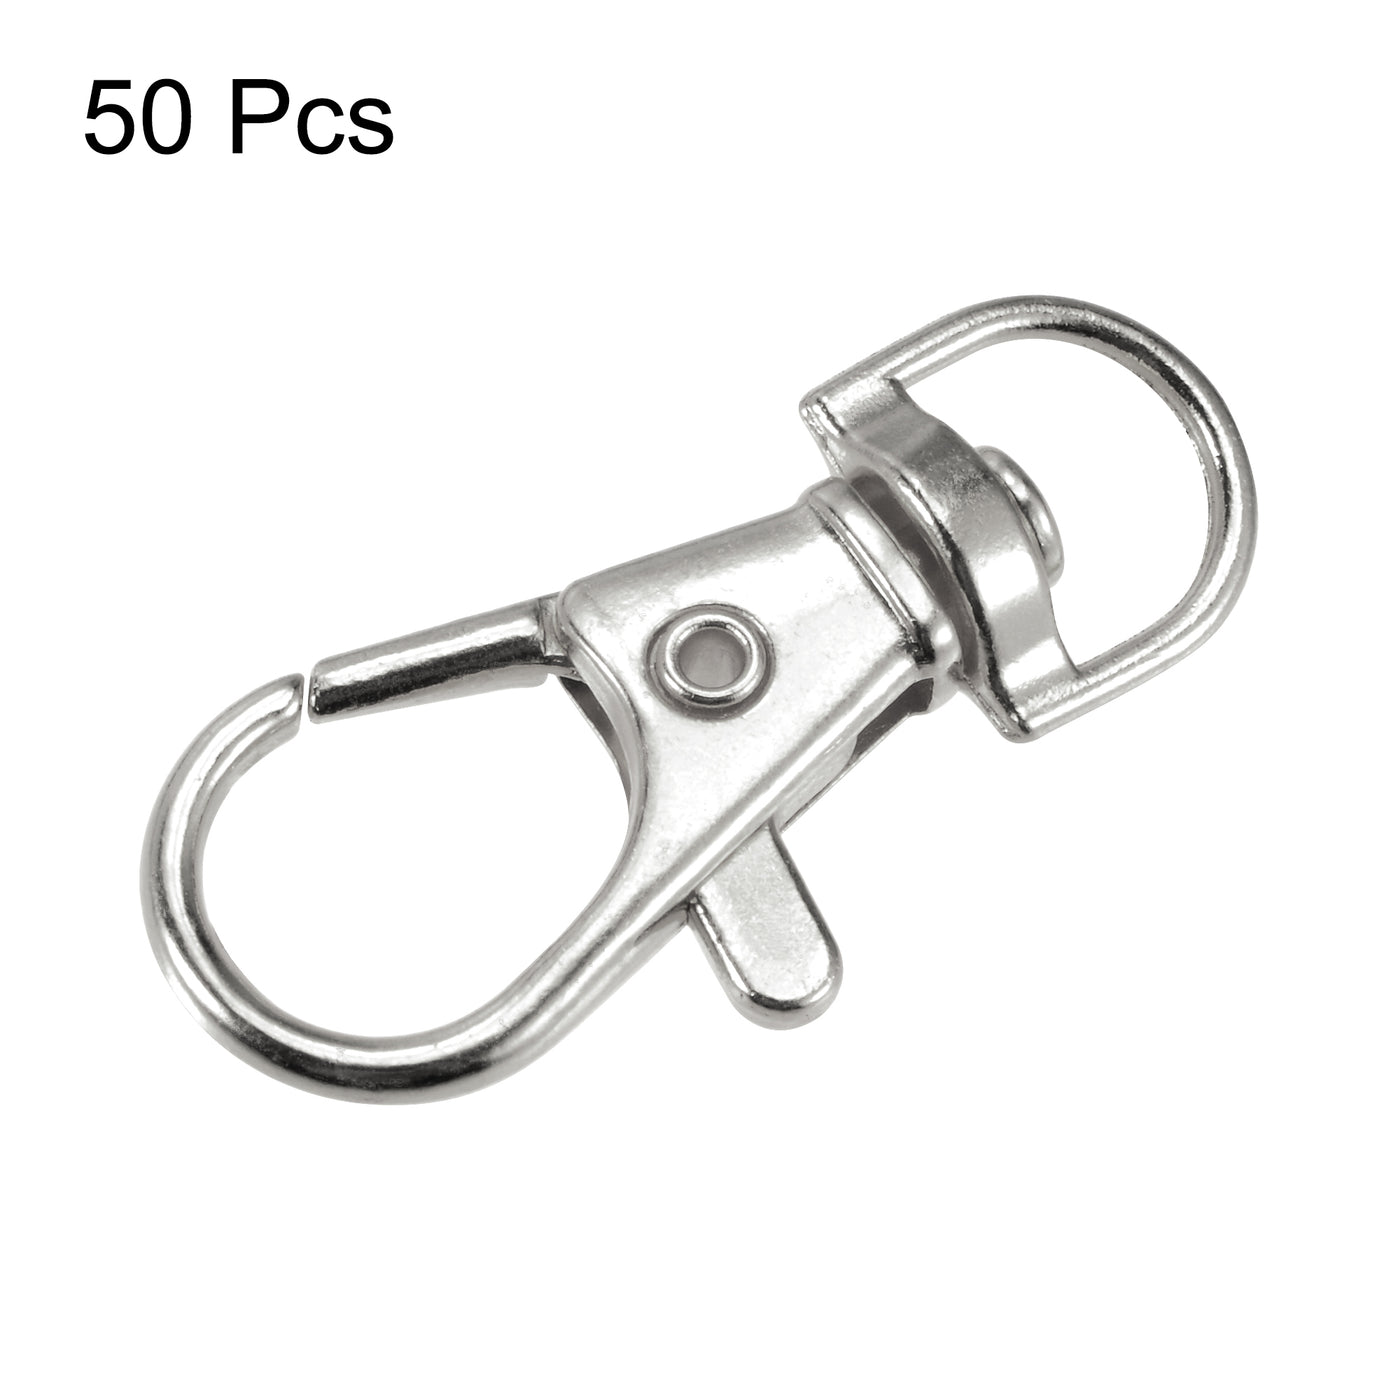 Uxcell Uxcell Swivel Clasps Lanyard Snap Hook 35mm Length, Zinc Alloy, Black, for DIY Crafts Keychains, 50pcs